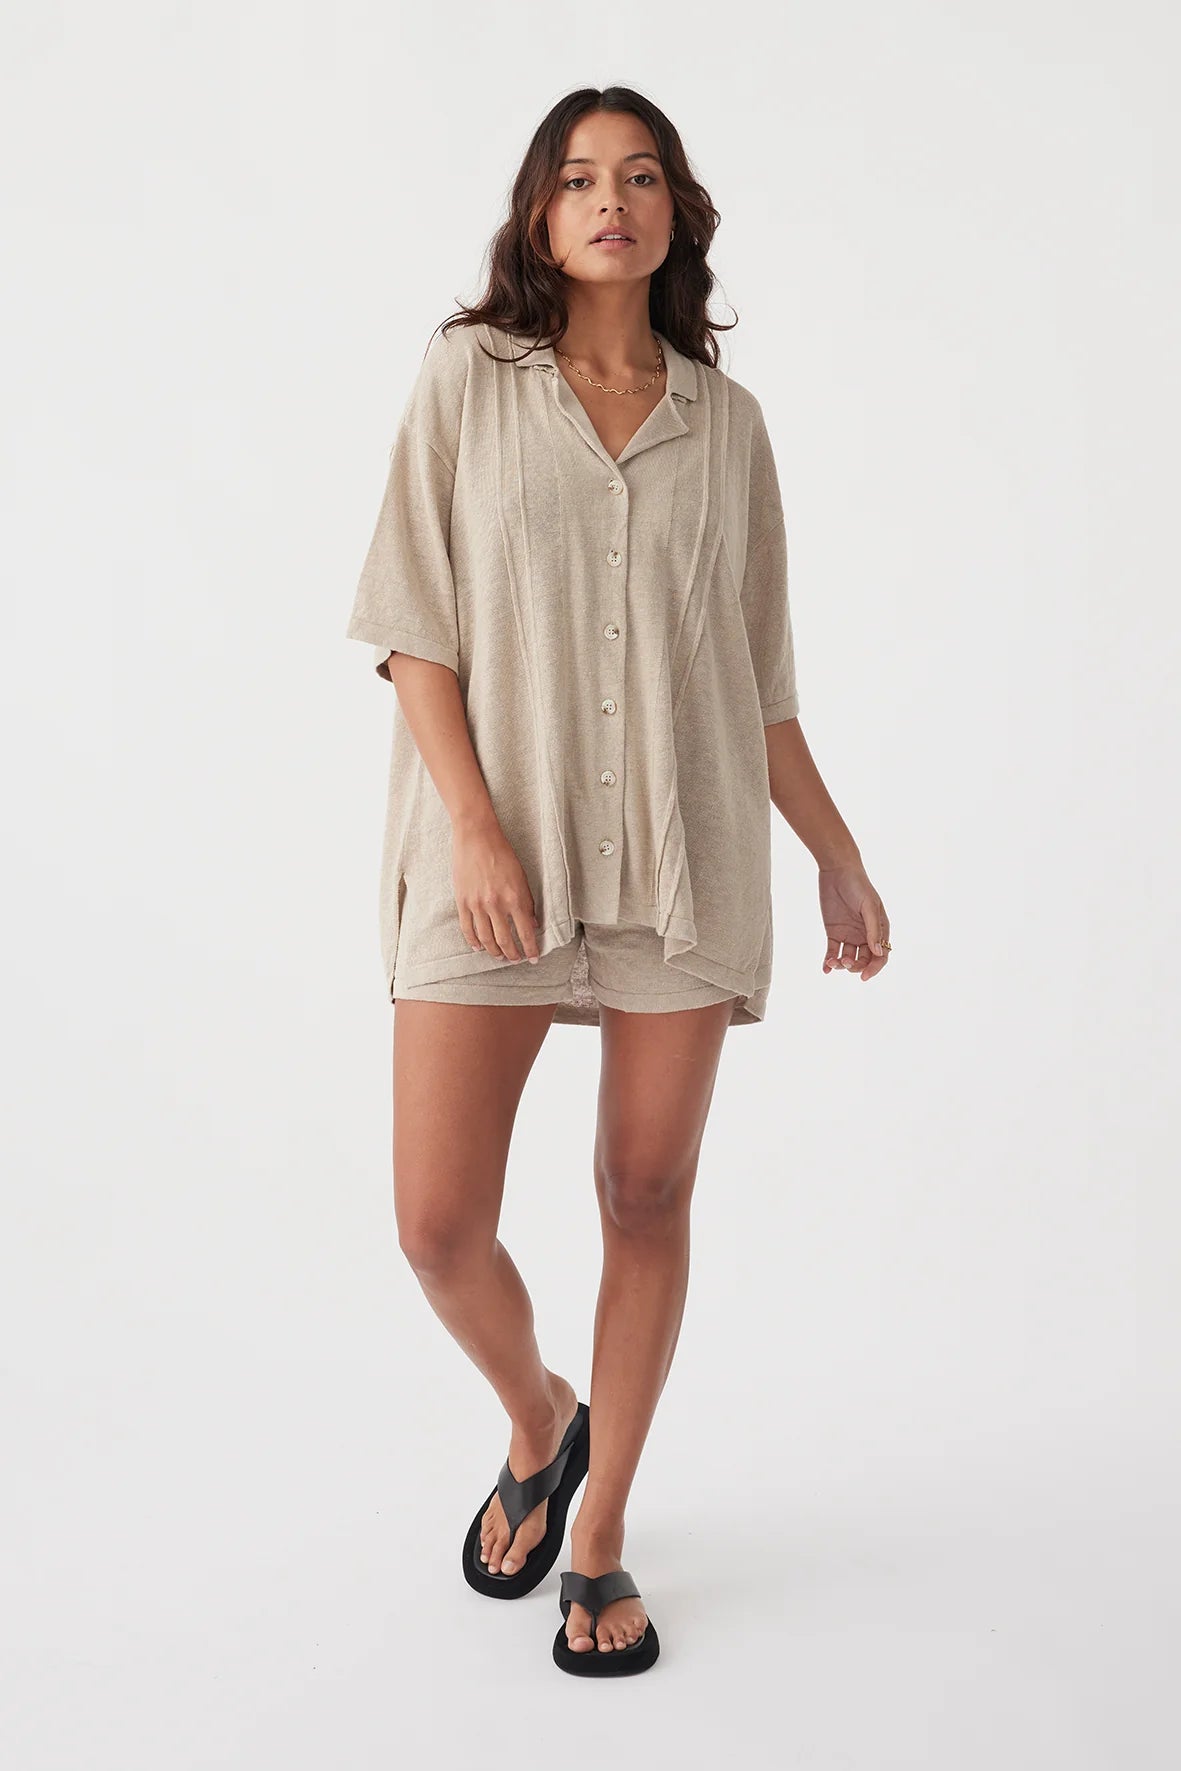 Darcy Short- Taupe